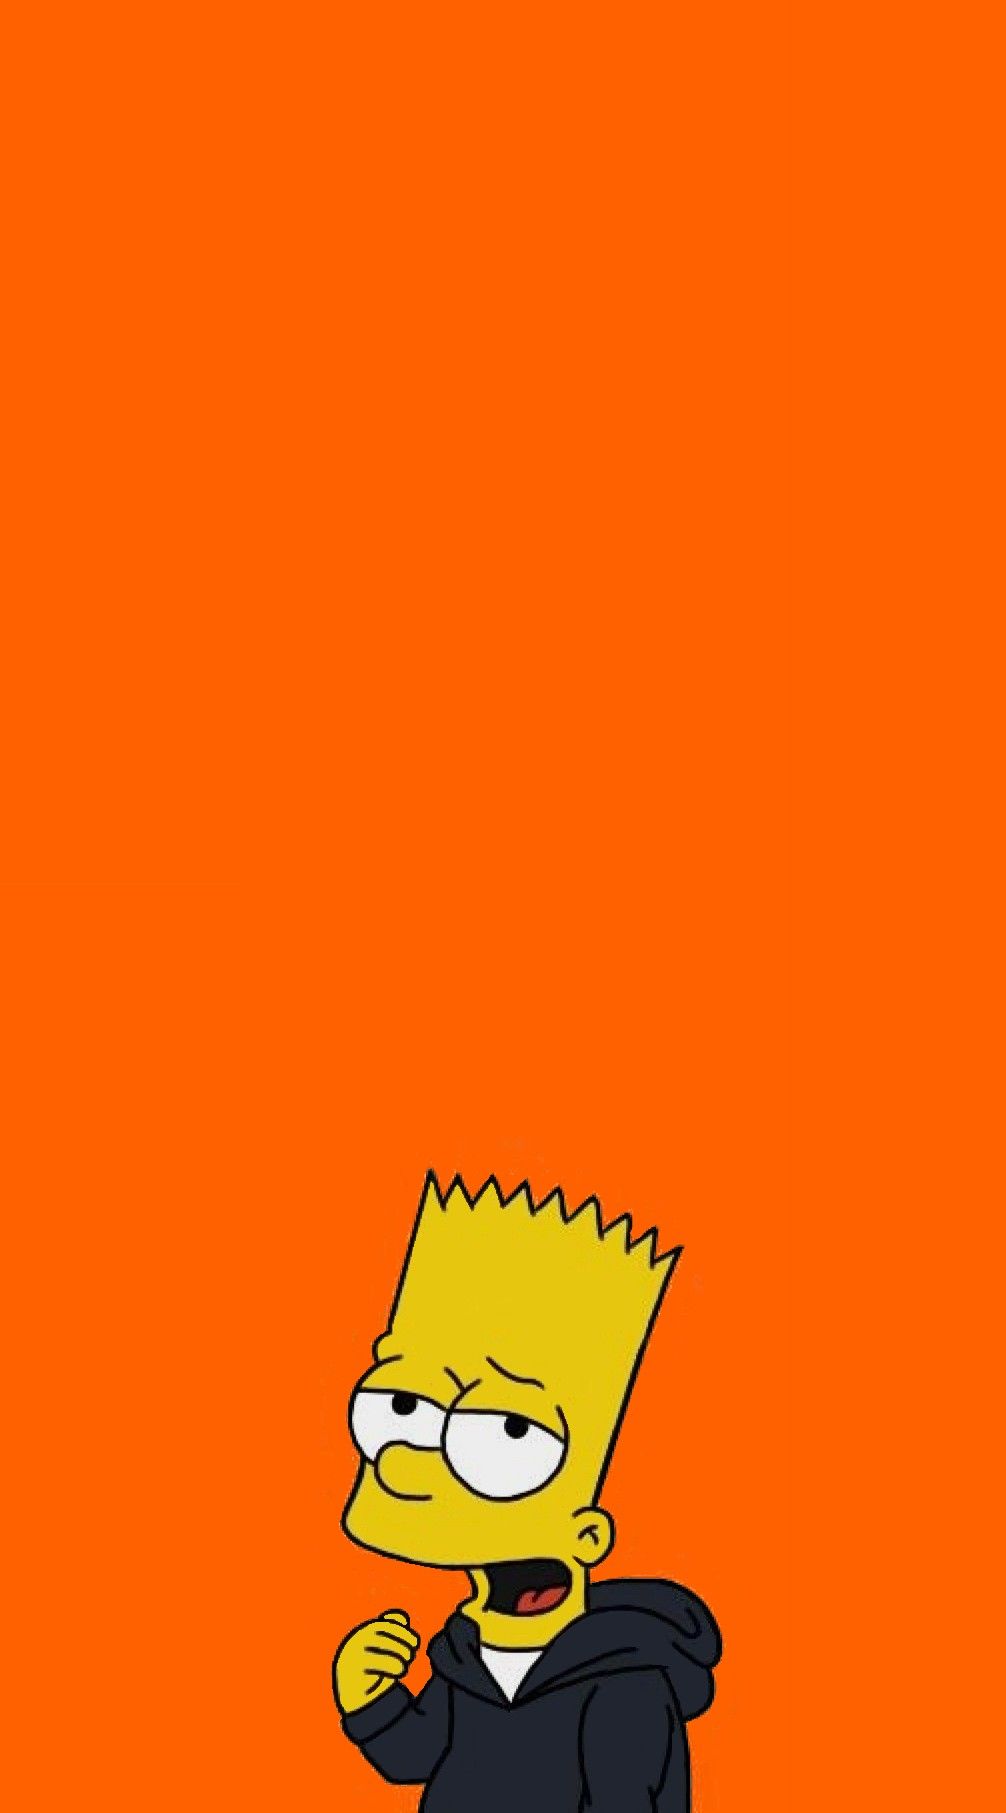 The simpsons wallpaper 1086x2394 - The Simpsons, Bart Simpson